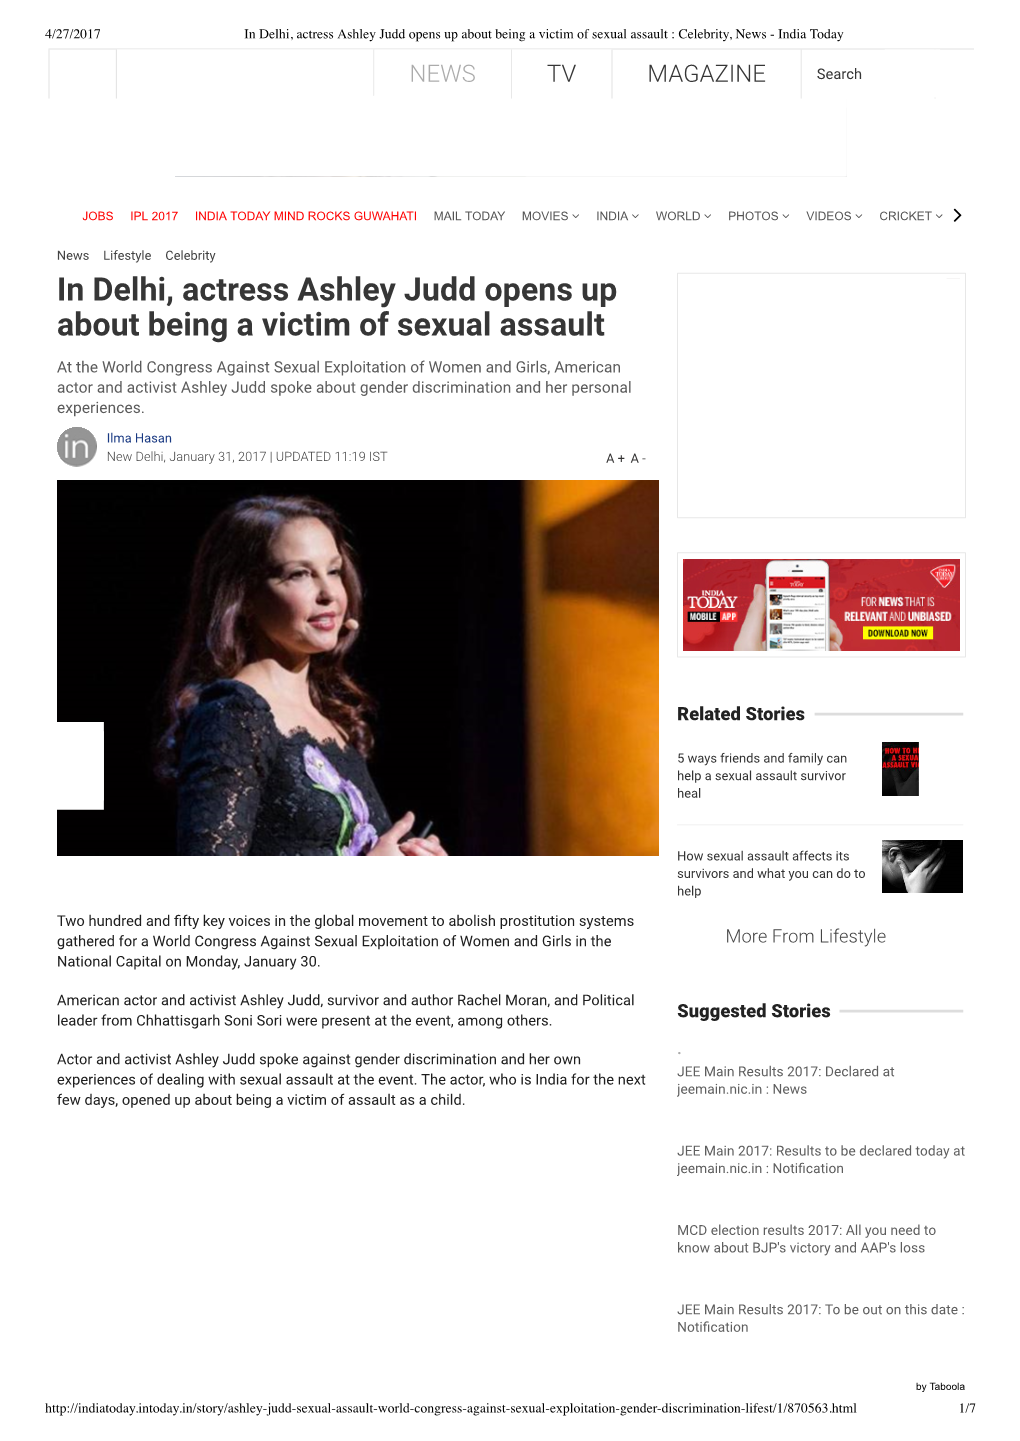 In Delhi, Actress Ashley Judd Opens up About Being a Victim of Sexual Assault : Celebrity, News - India Today